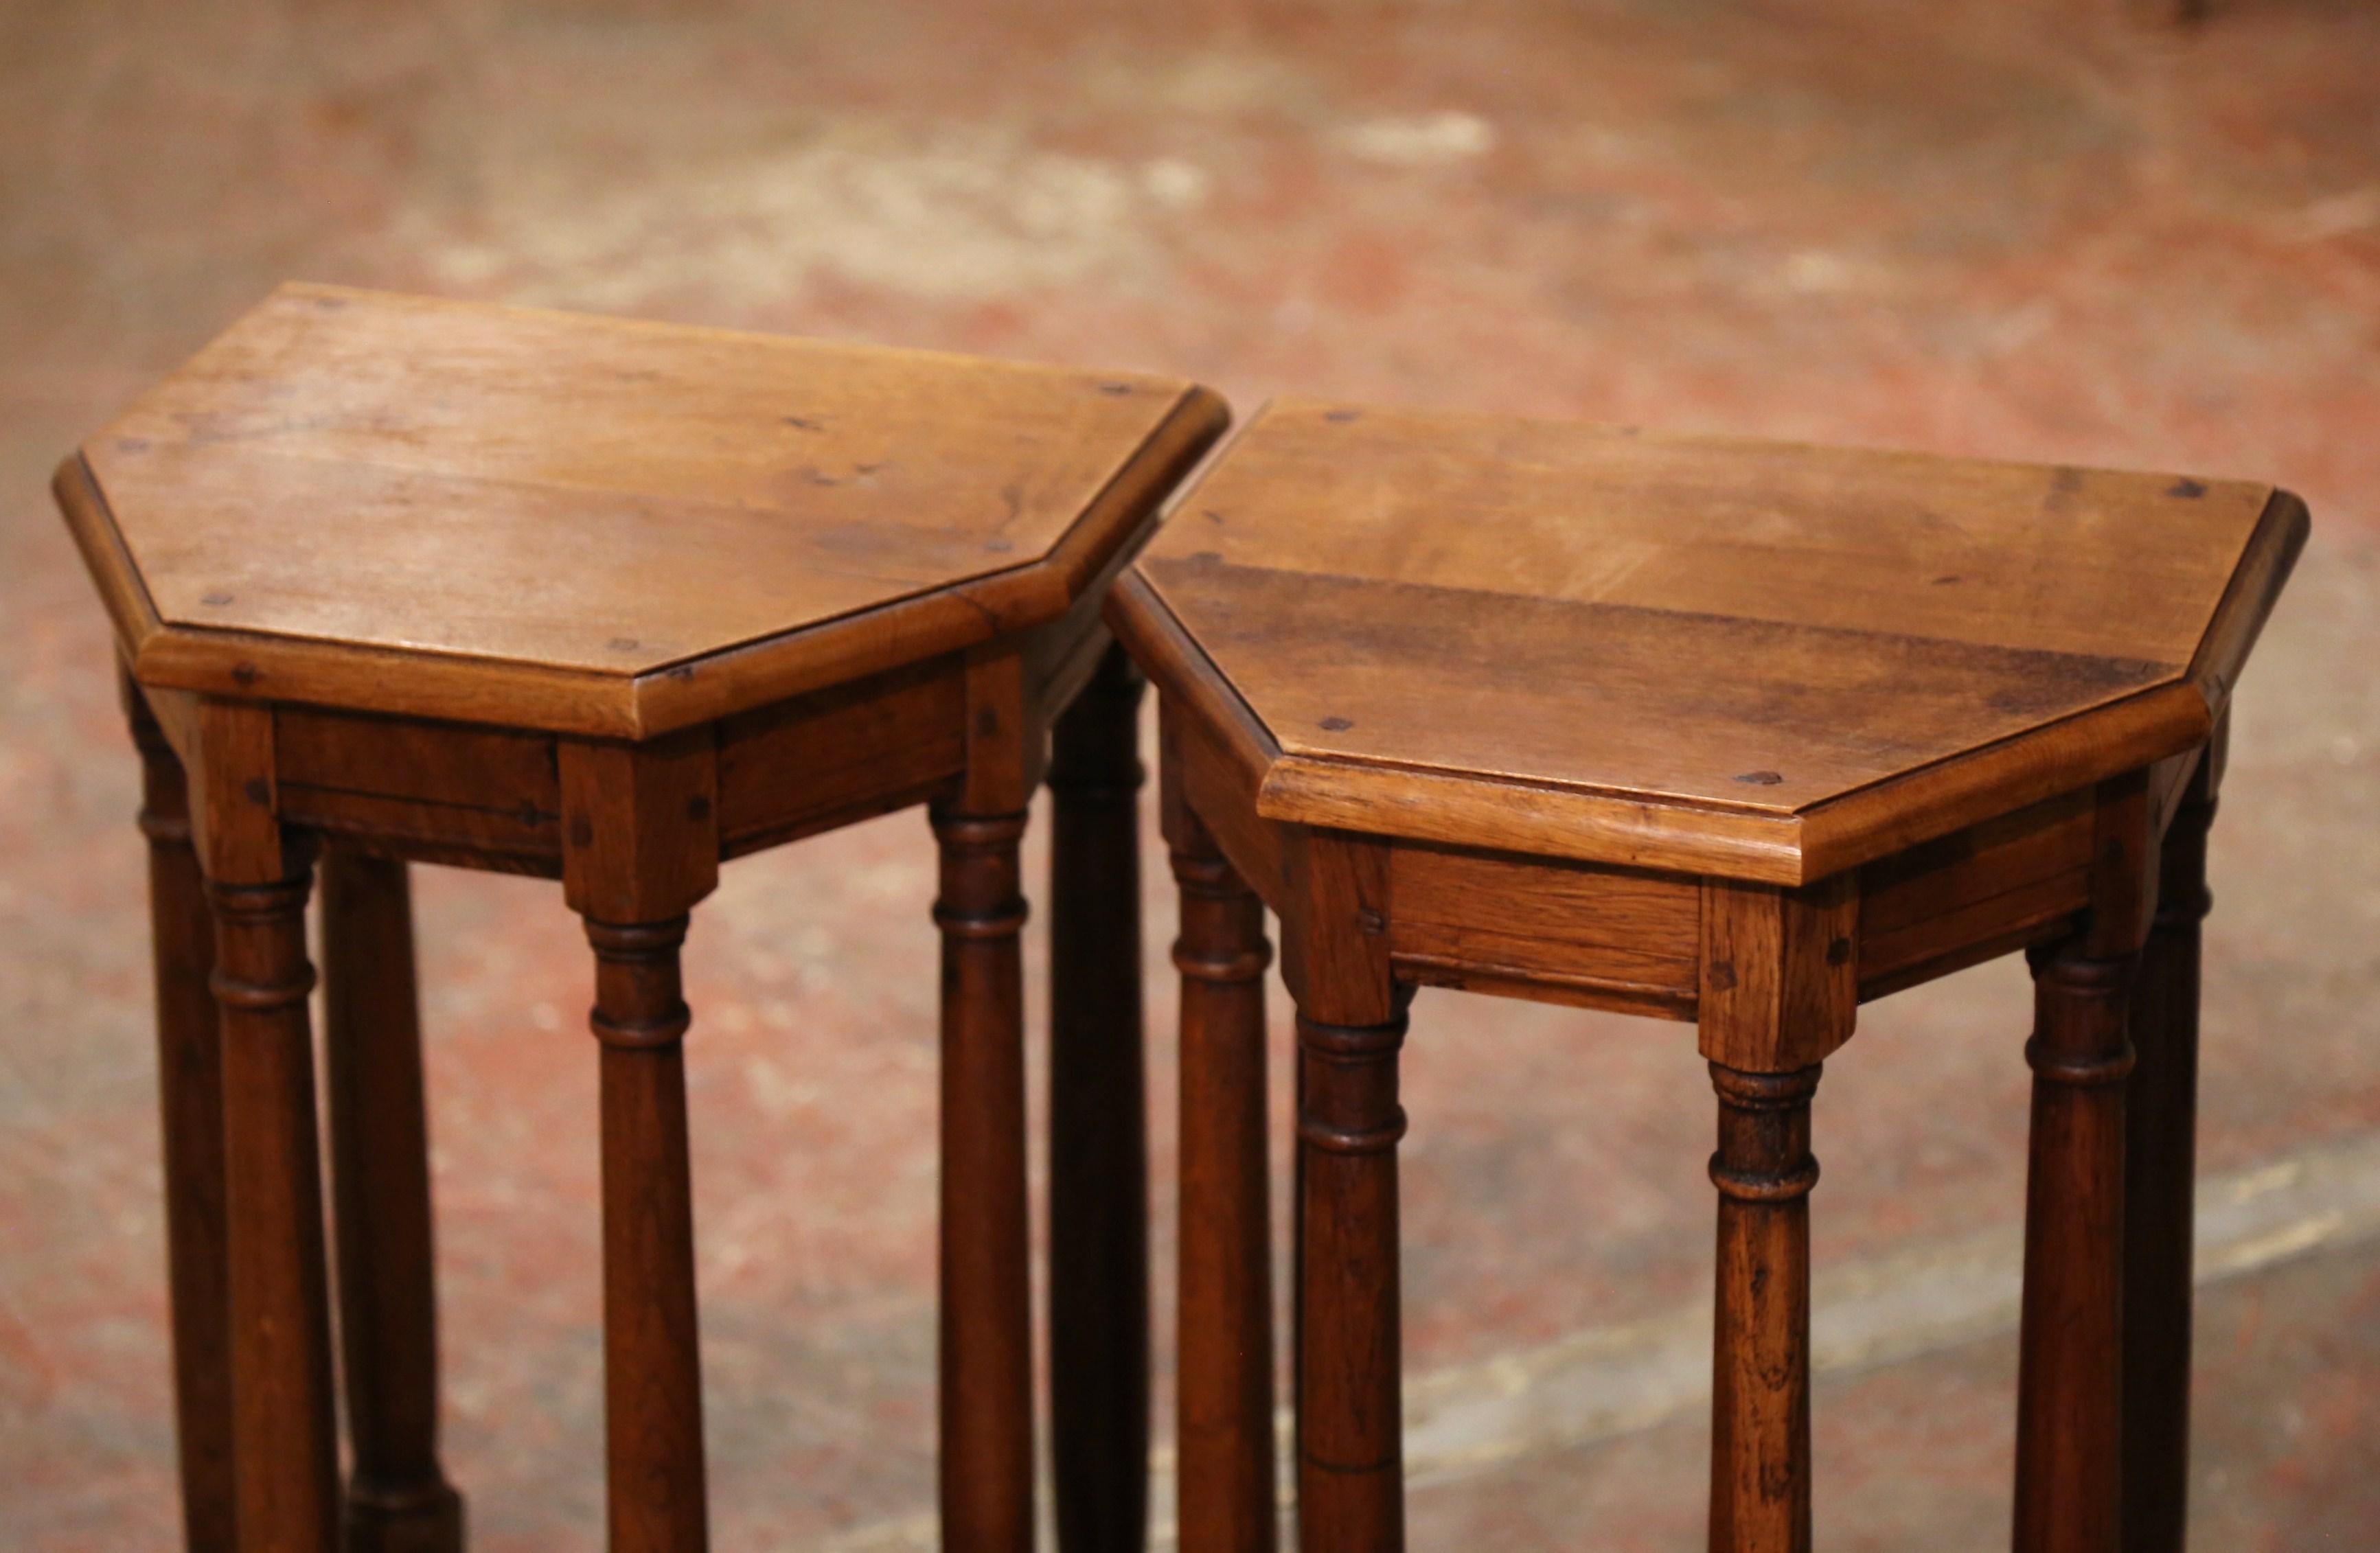 This elegant antique side tables were created in France circa 1960. Built of oak, the piece stands on six turned legs connected with a sturdy stretcher at the bottom. The top surface is angled across the front. The versatile demi-lune country